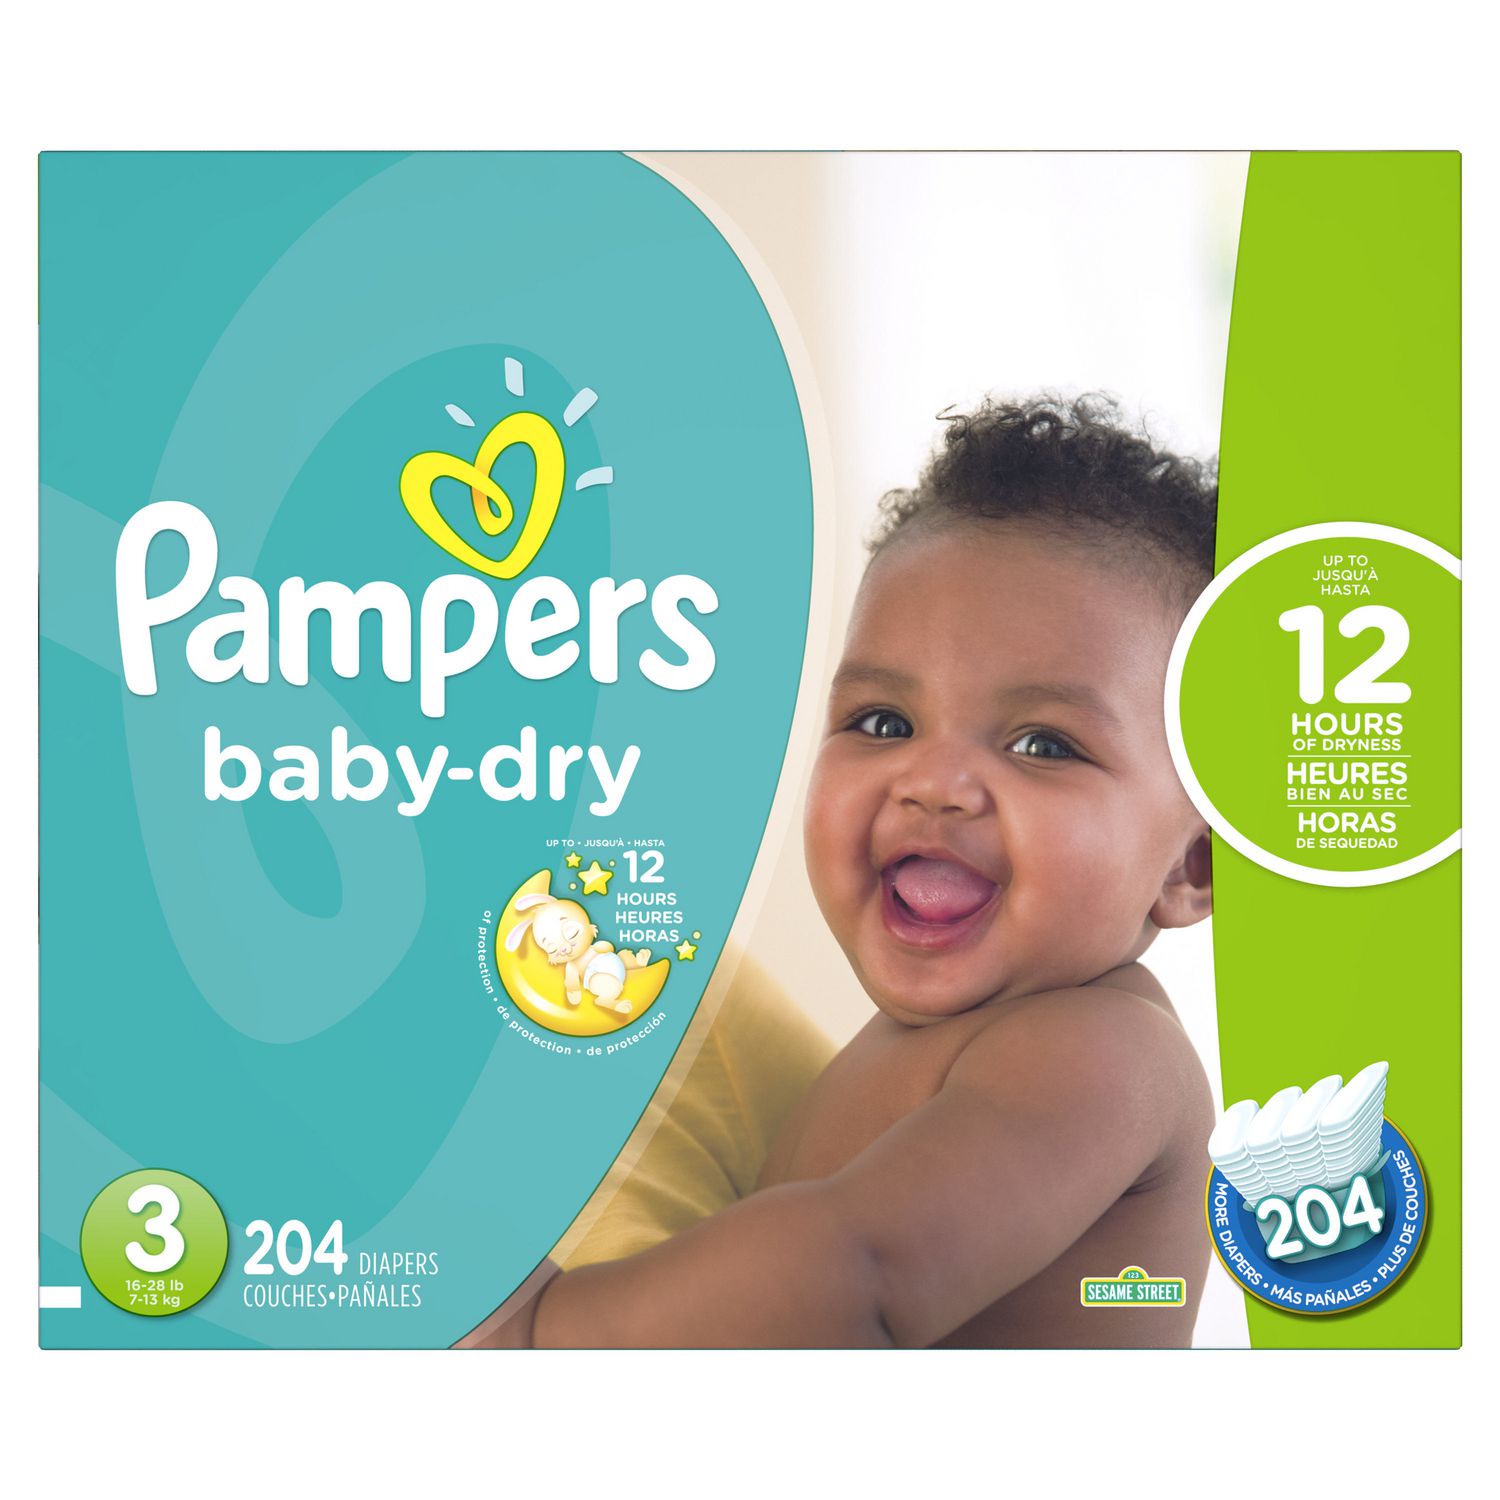 Pampers Paw Patrol Baby Dry Nappies Size 3, 234 Pack – Nonynana